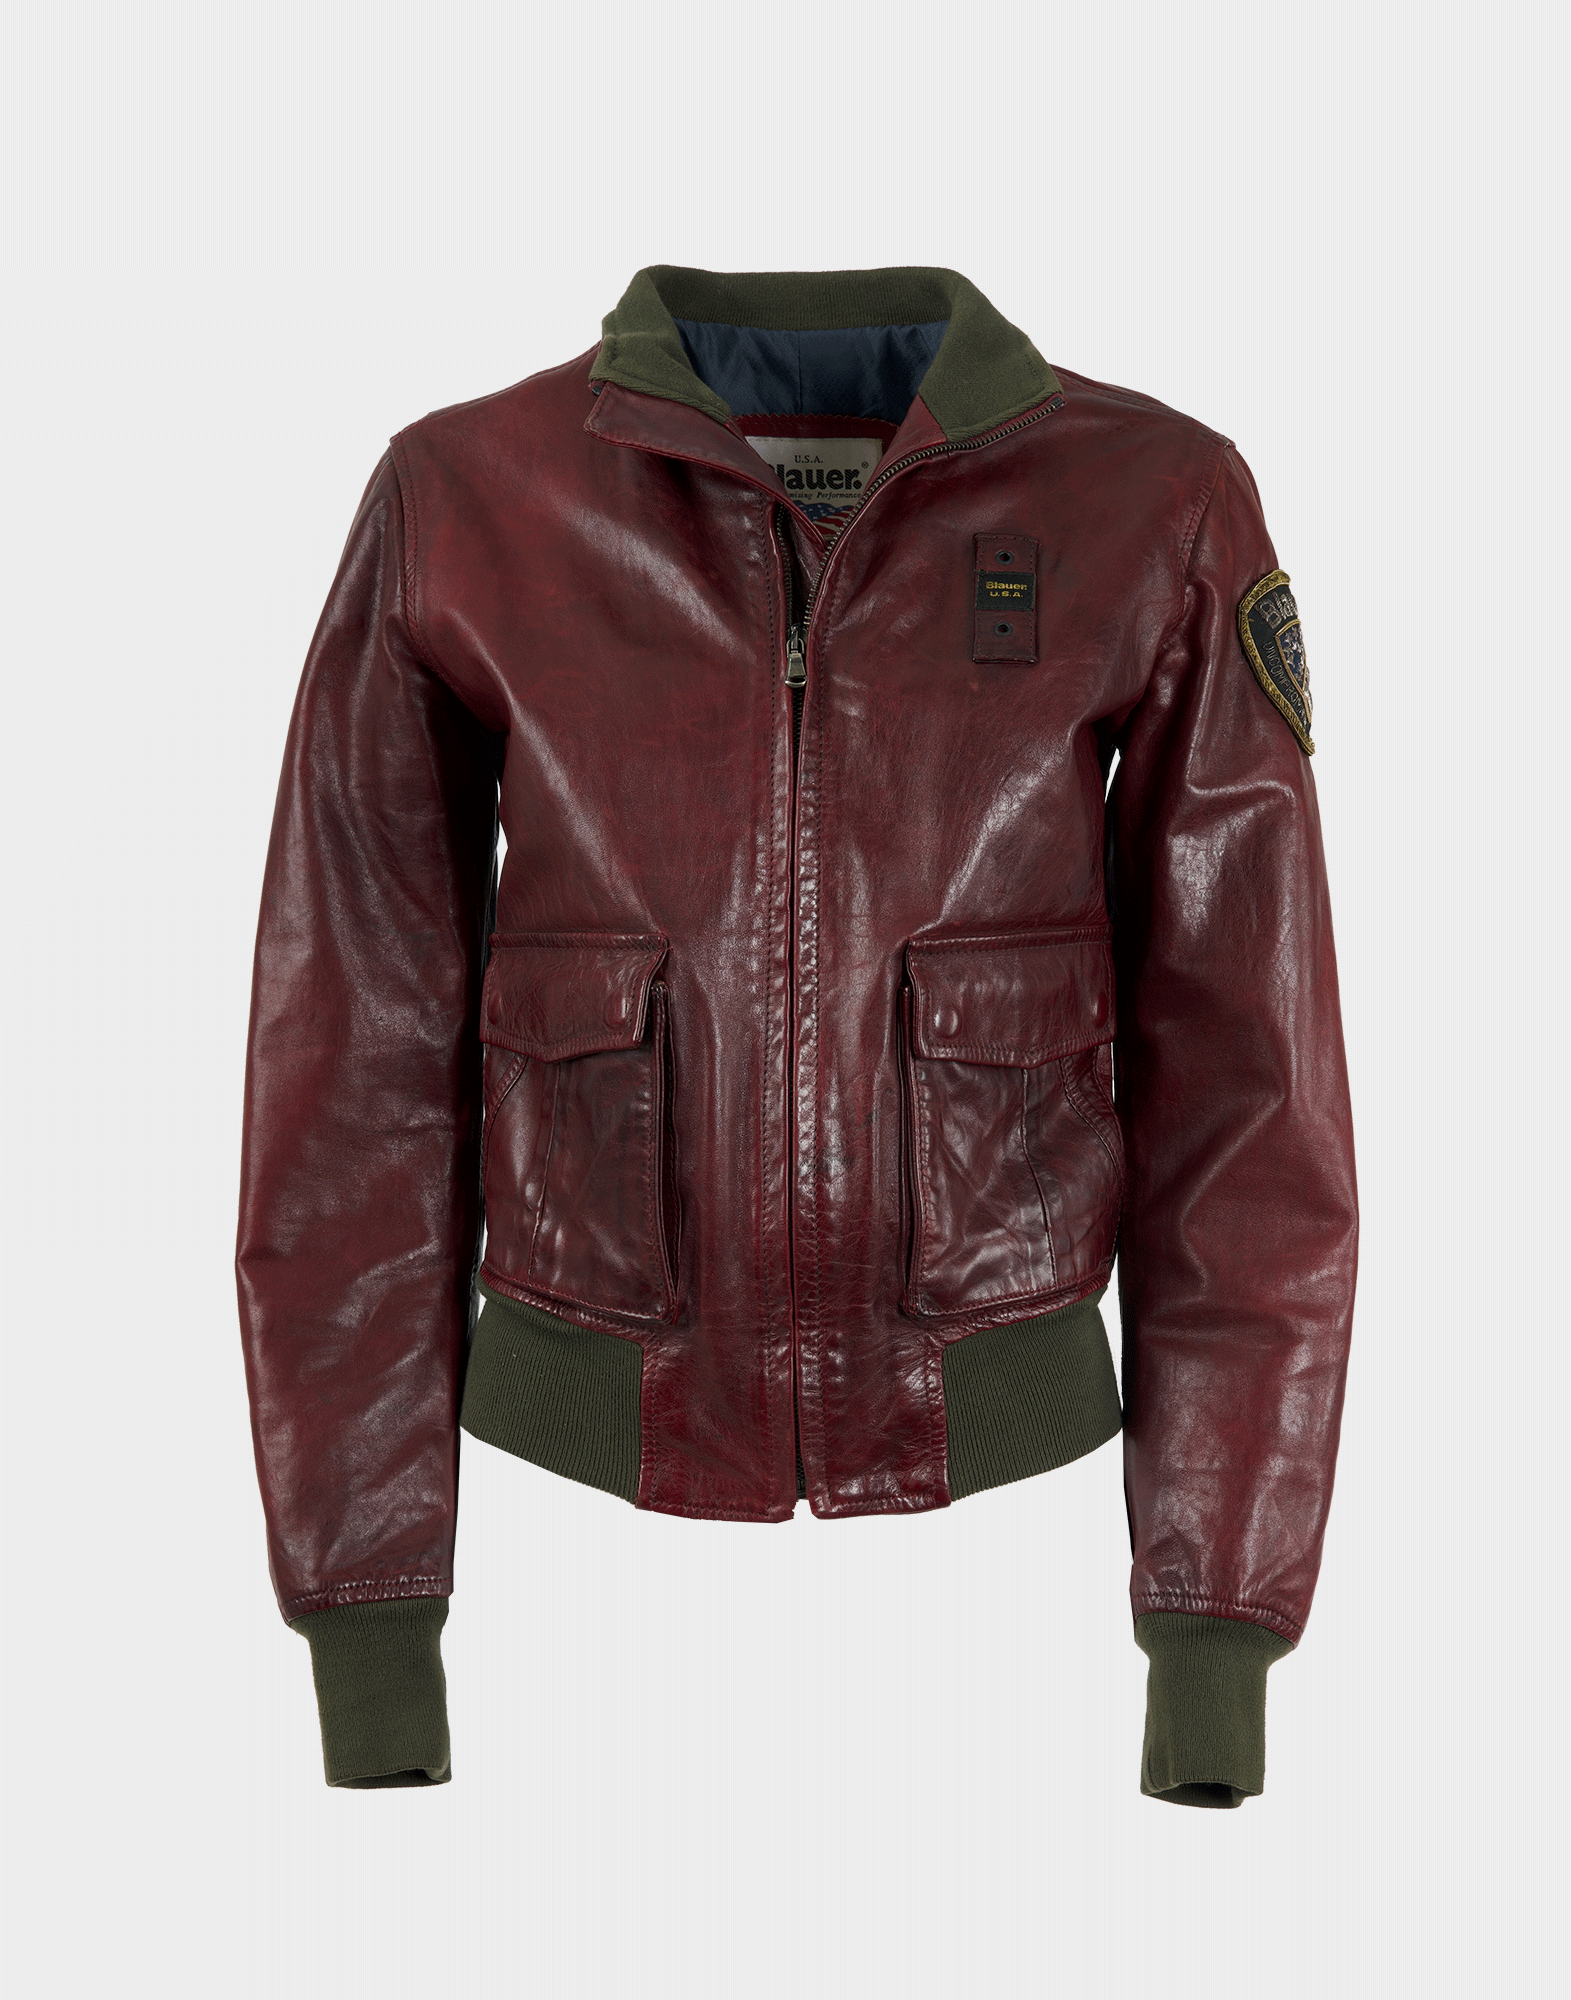 women's burgundy leather bomber jacket from the 1980s